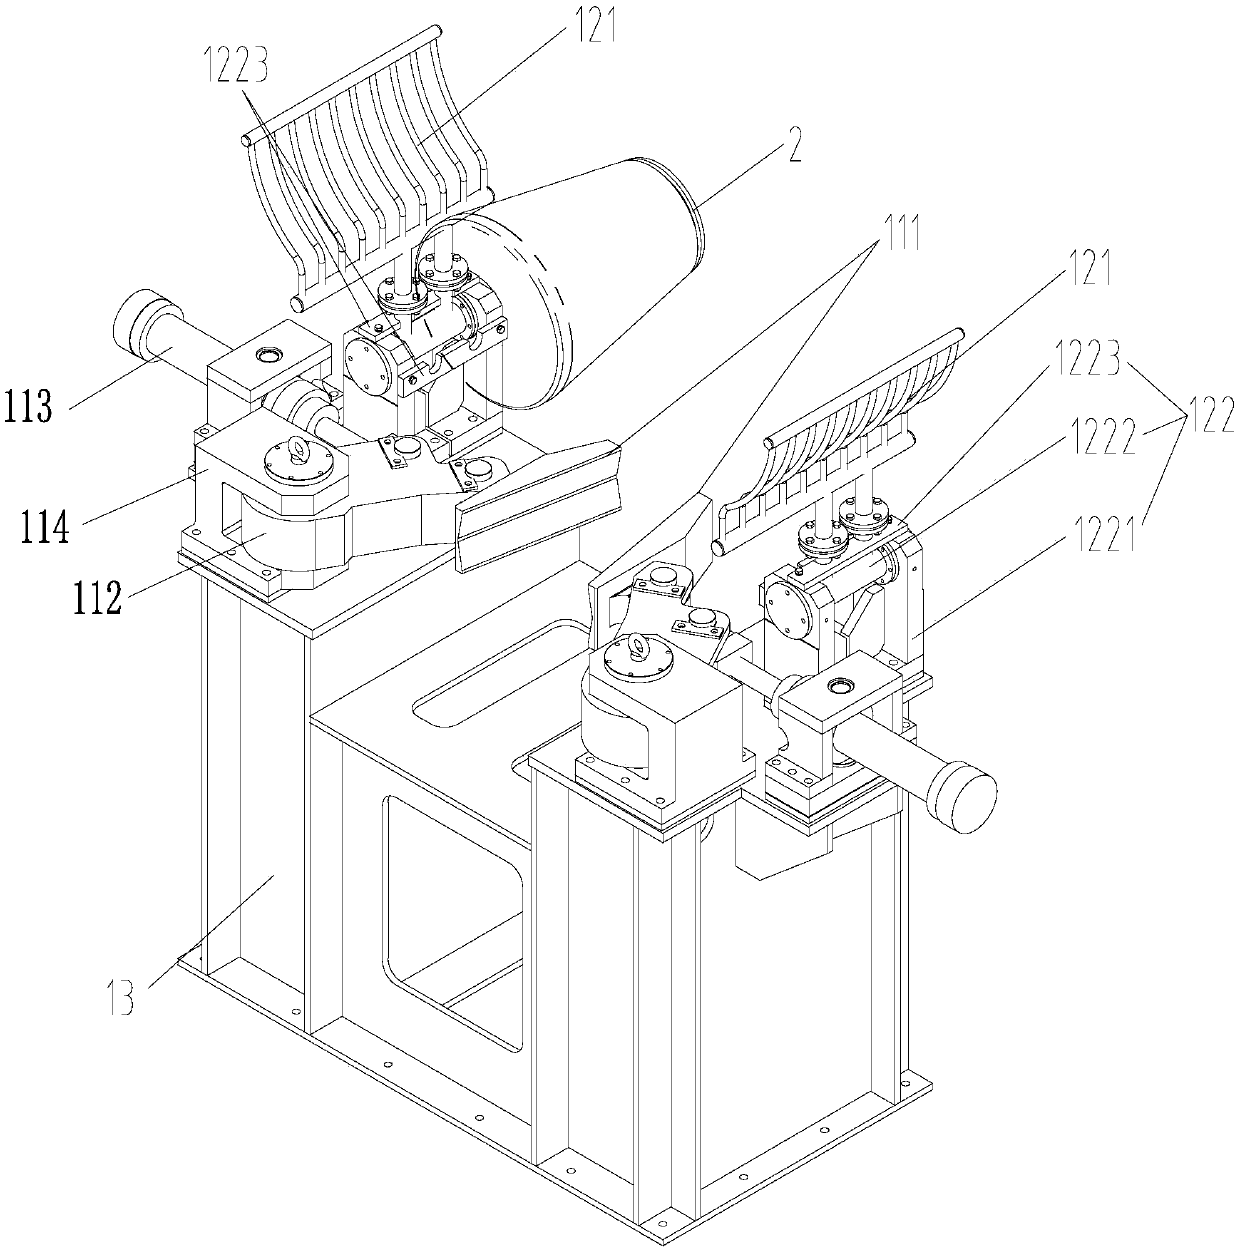 Head clamping spray cooling device